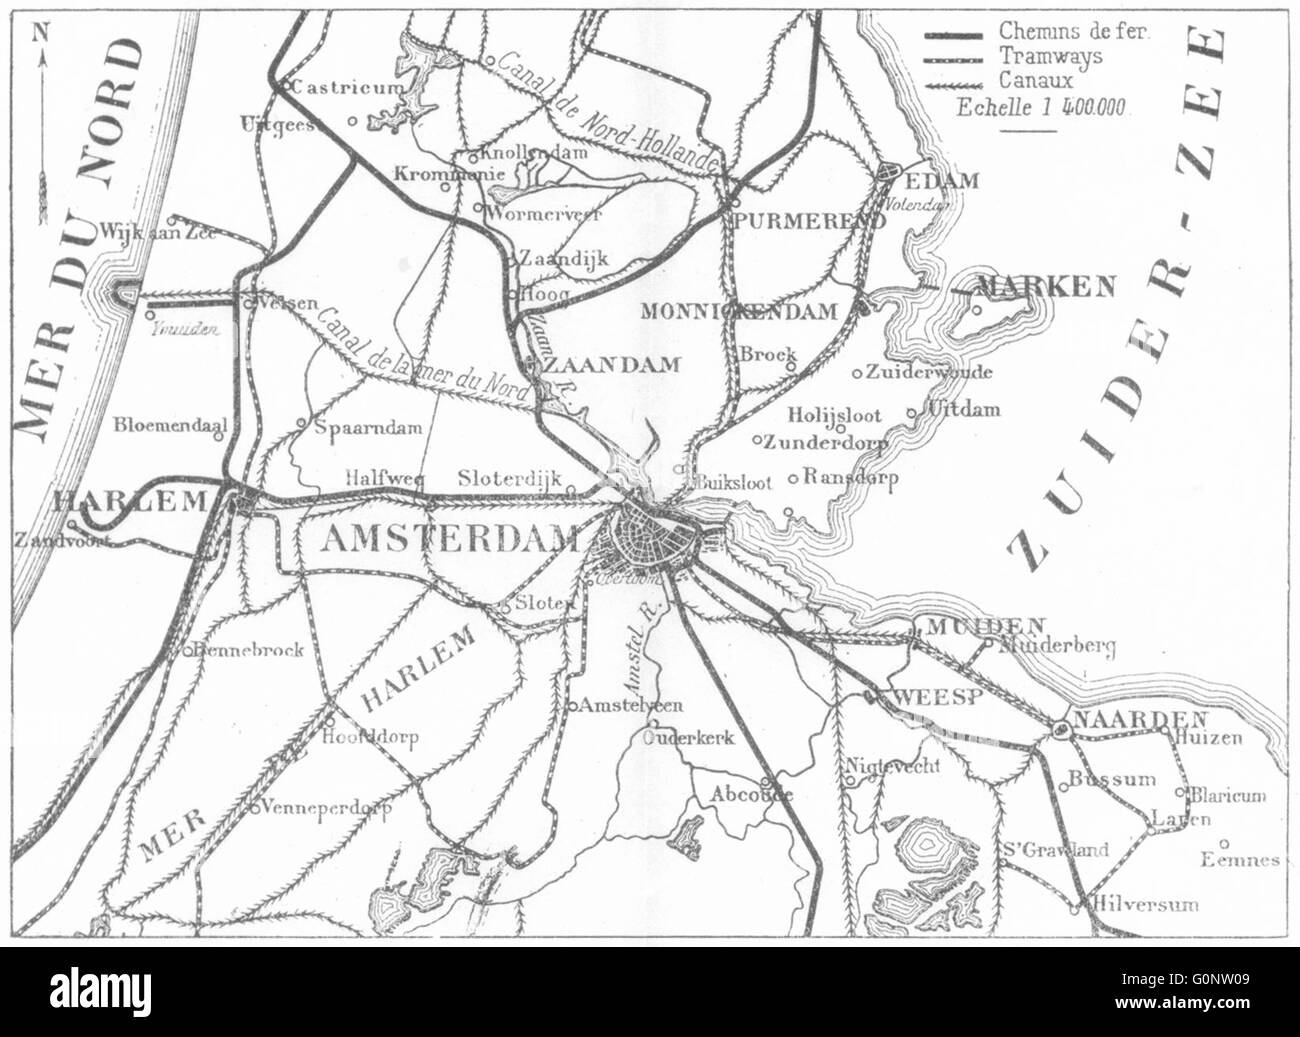 NETHERLANDS: Area d'Amsterdam, 1909 antique map Stock Photo